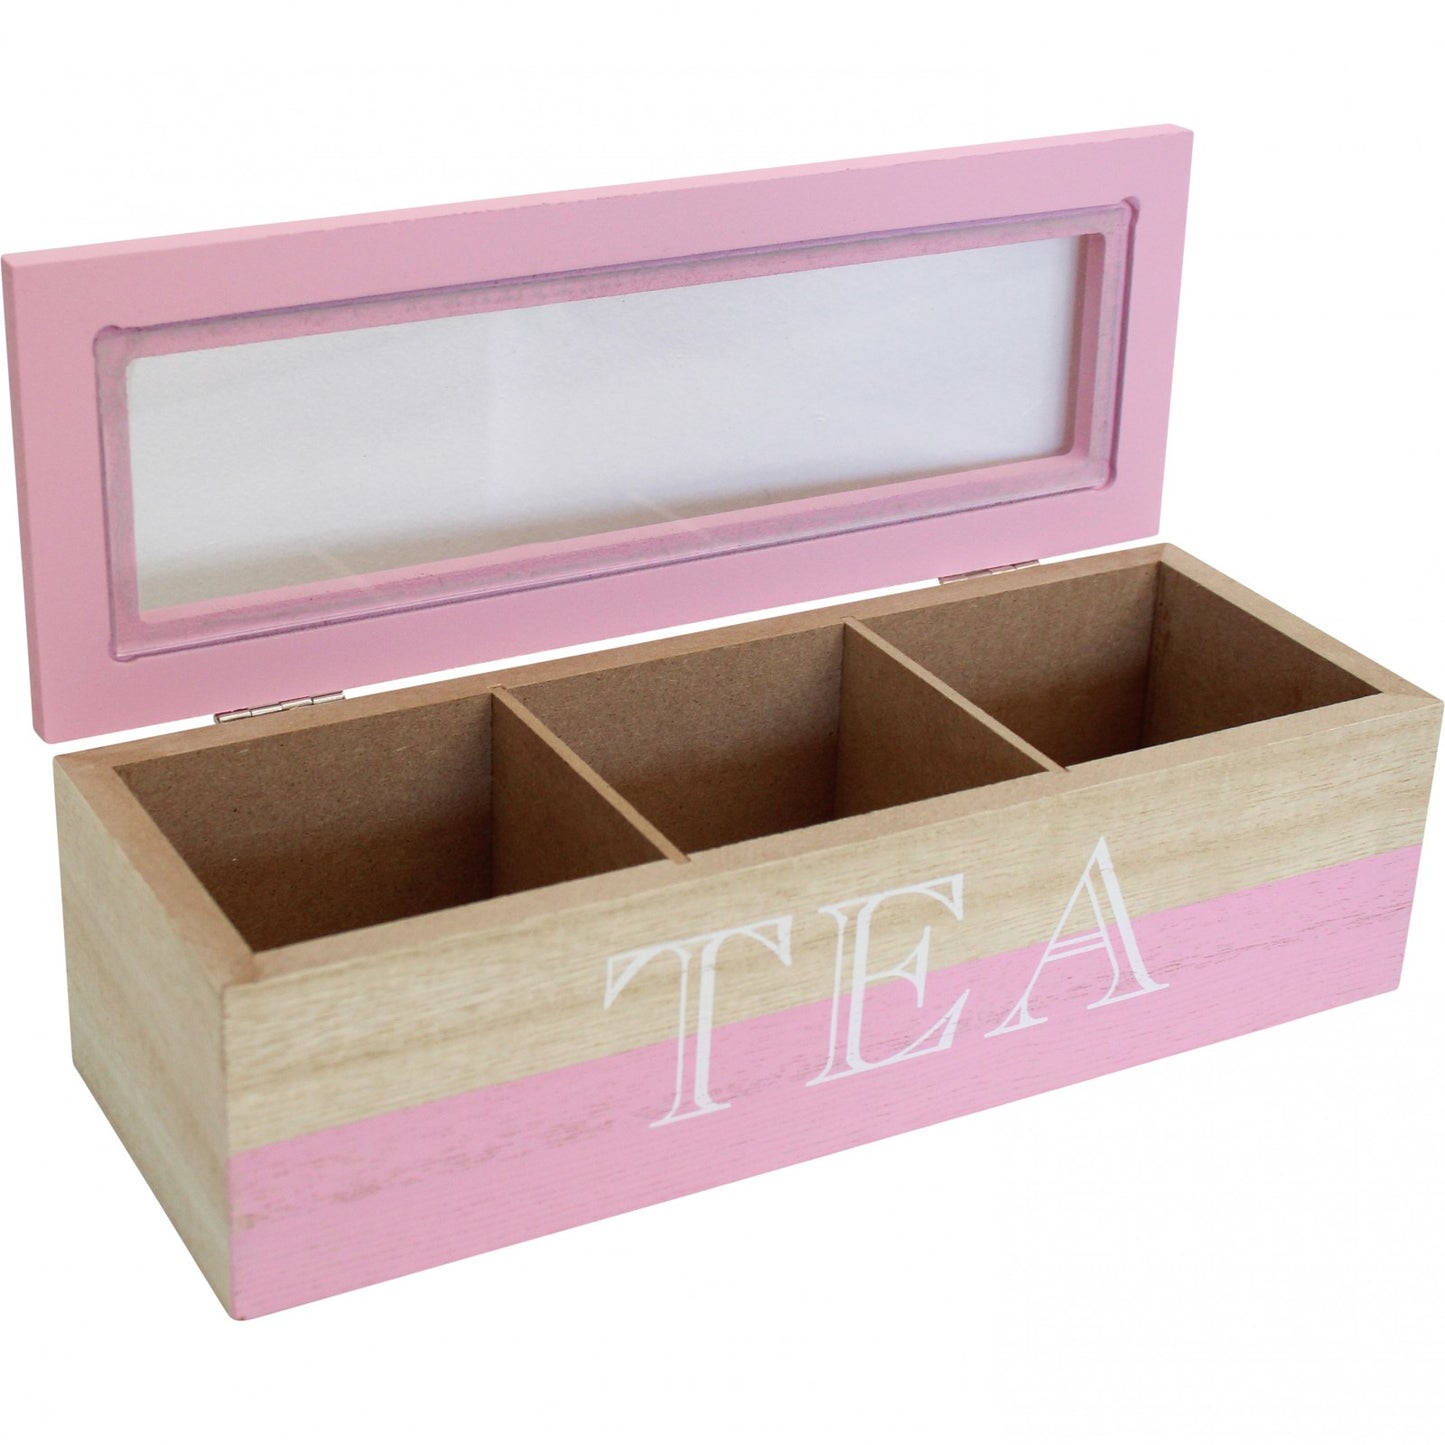 Tea Box Shabby Chic Pink - The Renmy Store